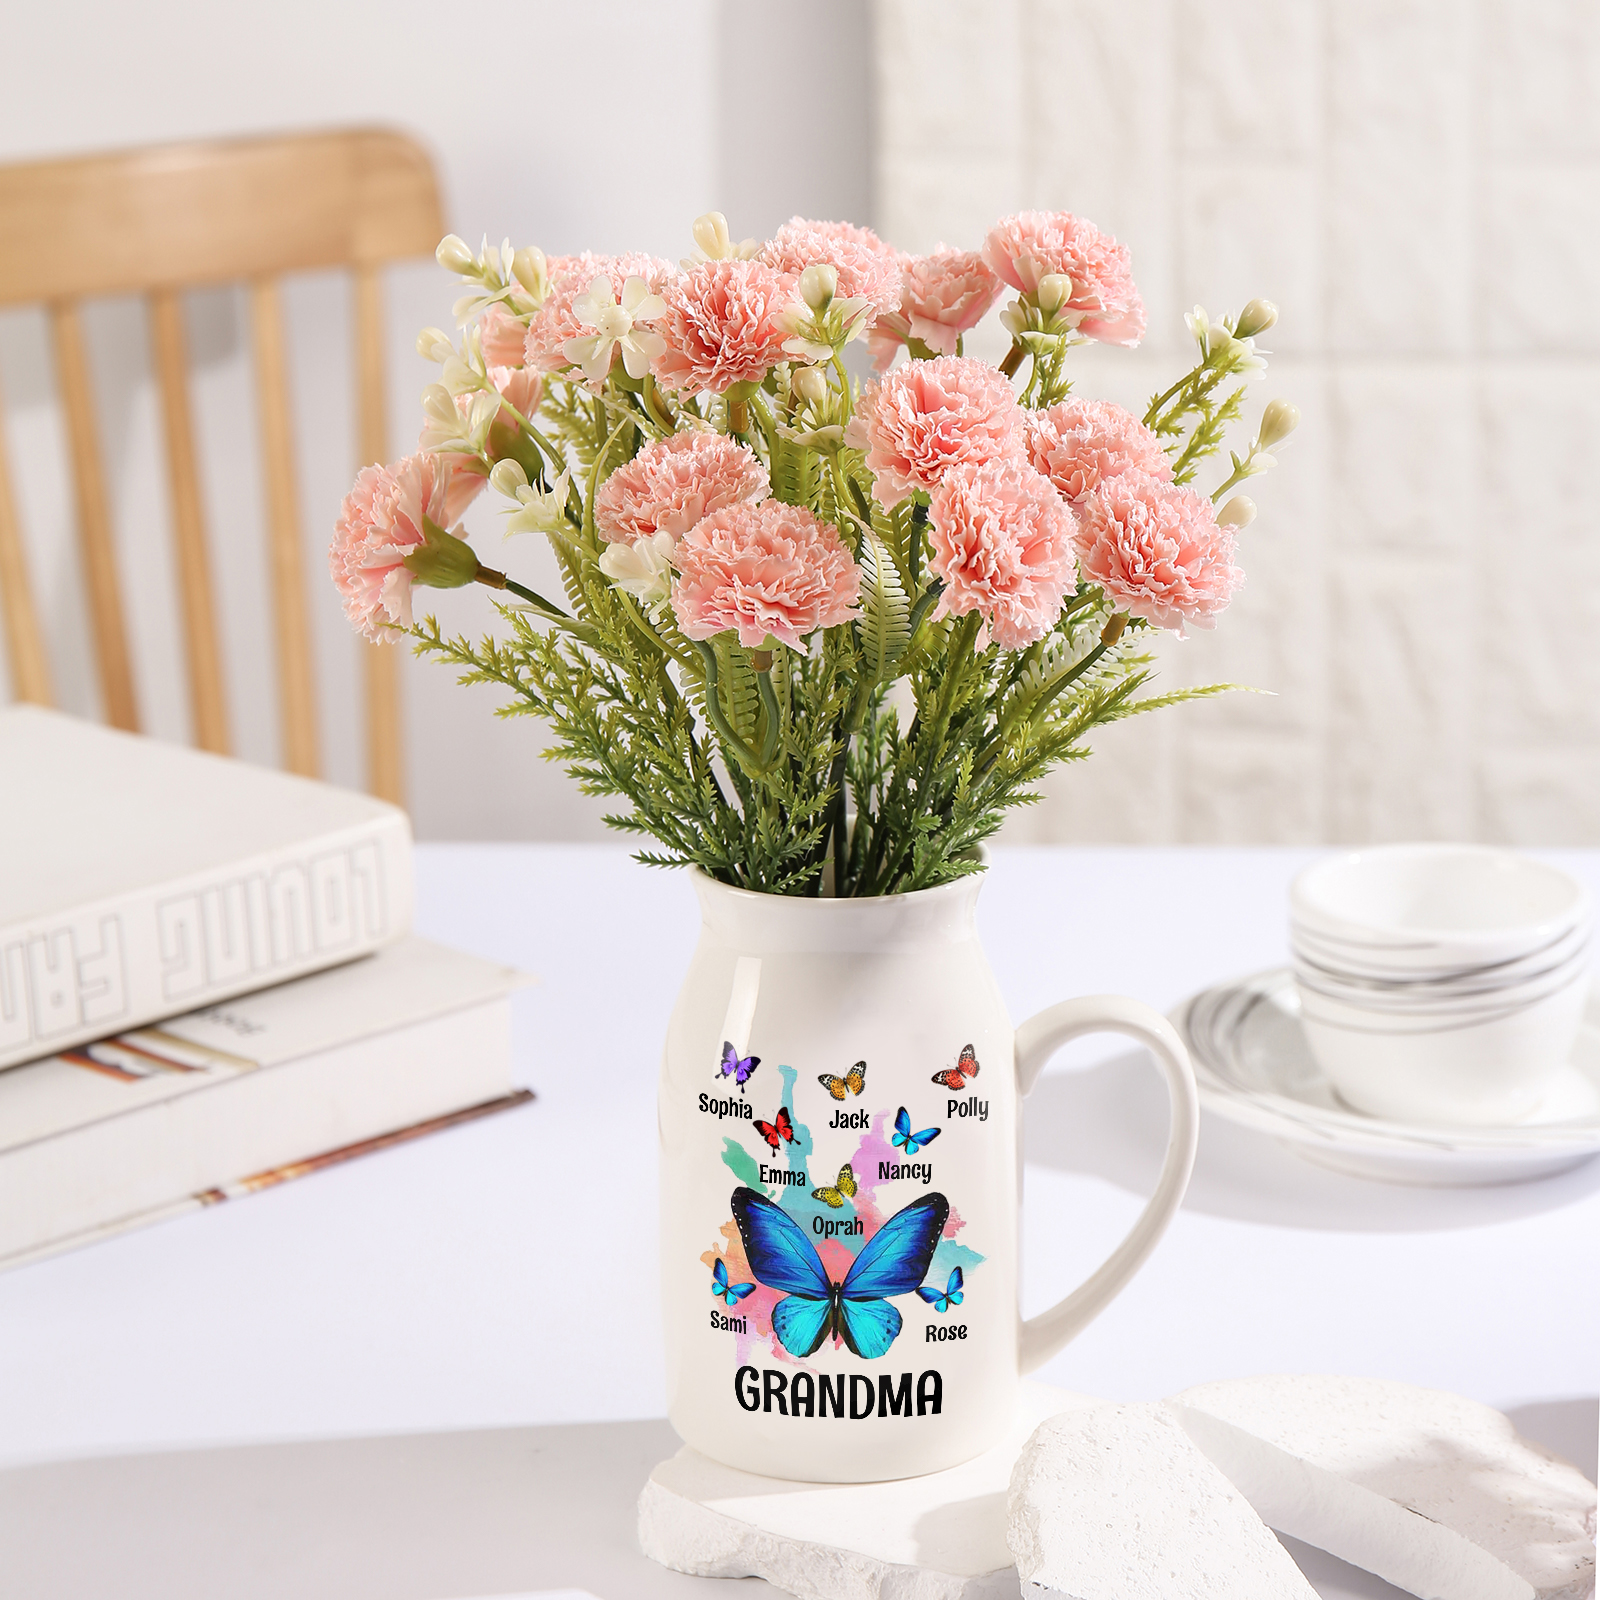 8 Names - Personalized Beautiful Colorful Butterfly Style Ceramic Vase with Customizable Names As a Wonderful Gift For Grandma